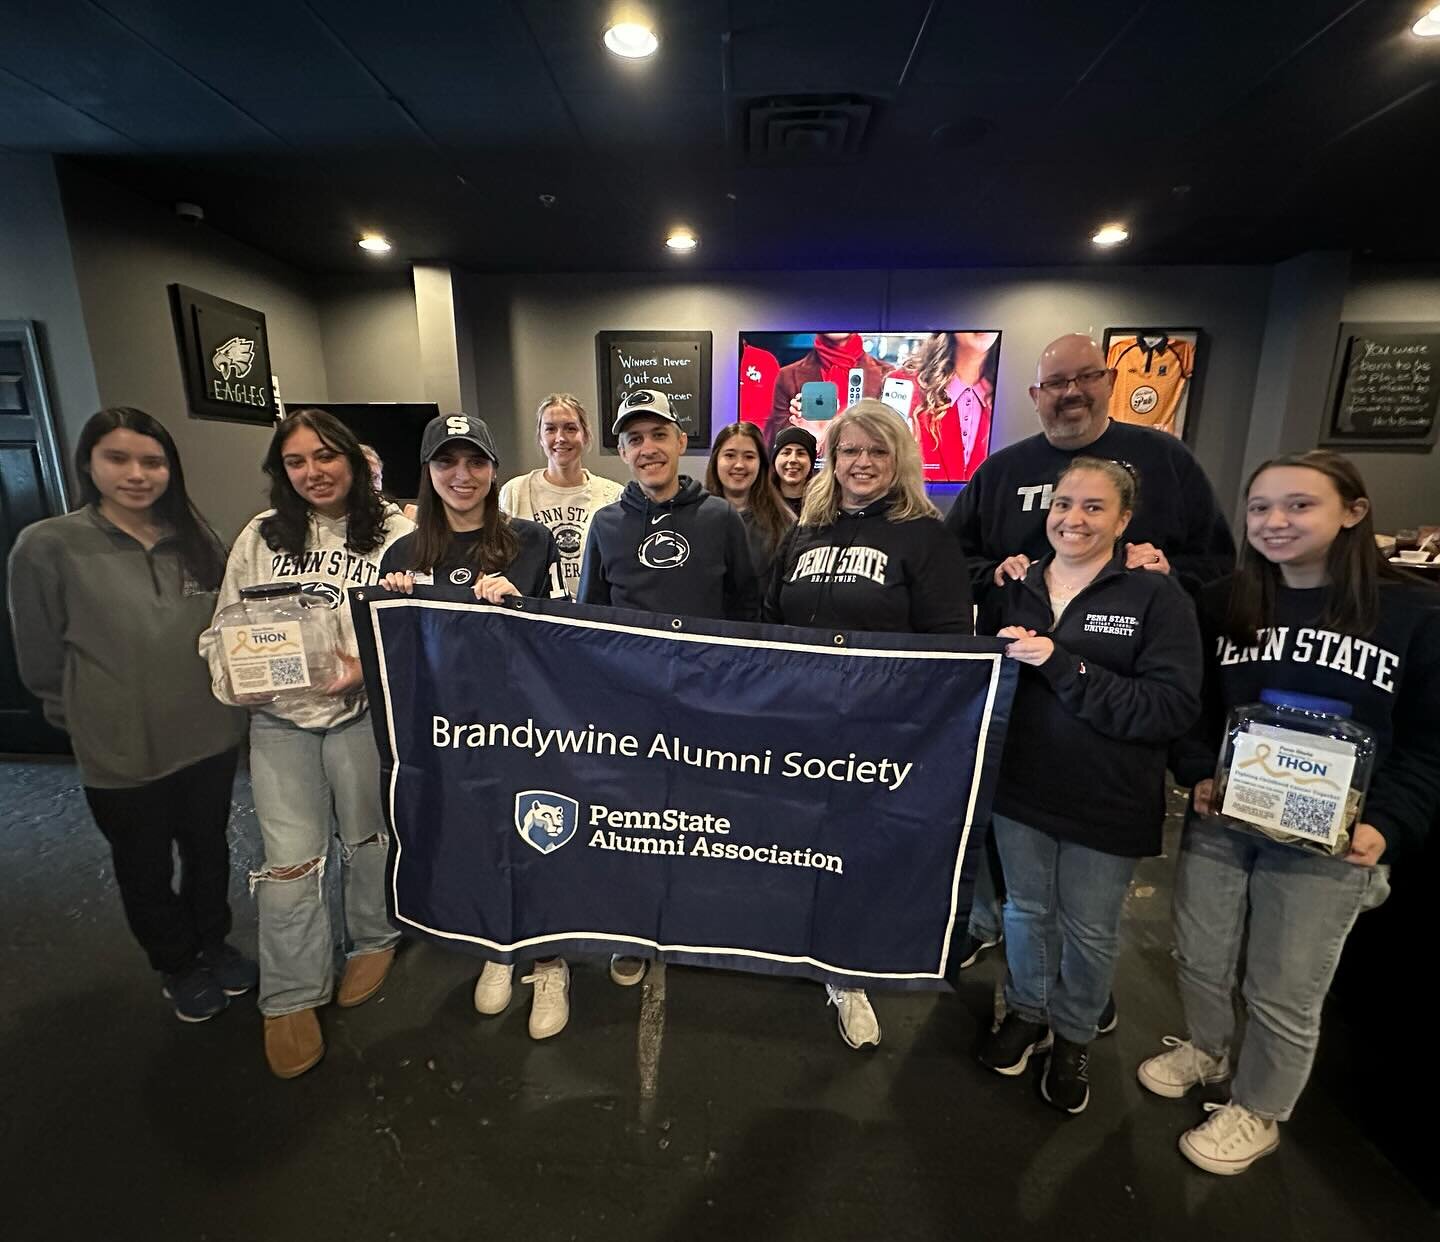 We had a fun afternoon cheering on our Nittany Lions at @statestreetpubmedia ! Not the outcome we wanted but we&rsquo;re still proud of our team 🏈🎉 #psu #psufootball #weare #pennstatealumni #pennstatebrandywine #thon